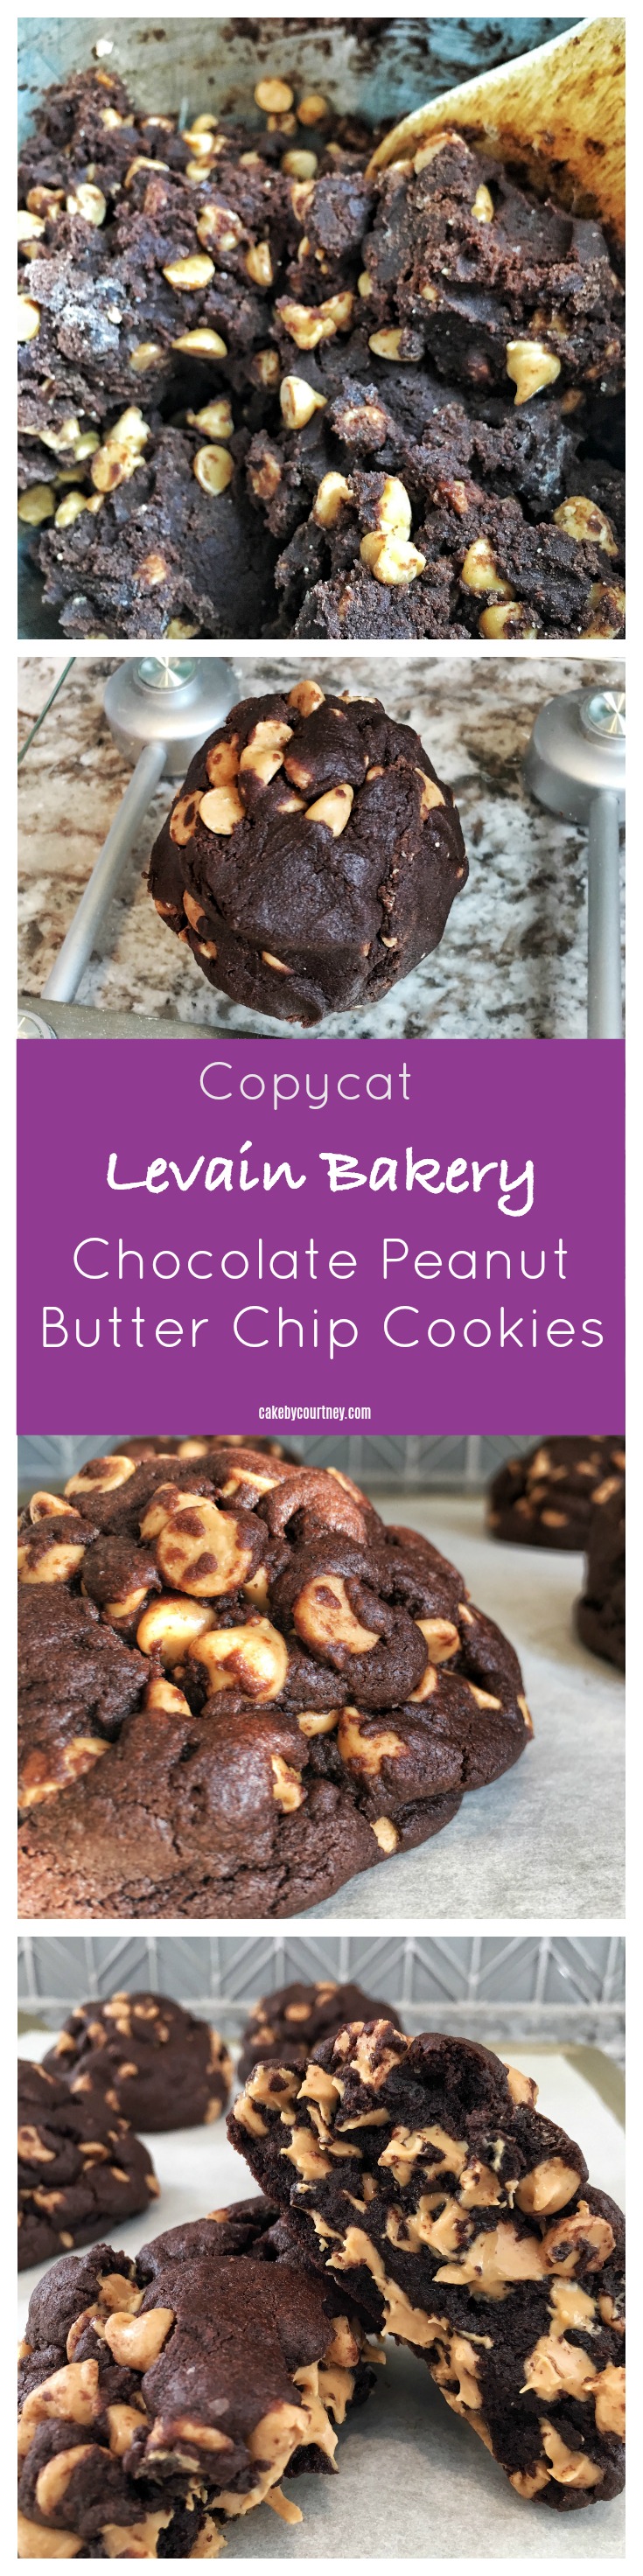 Delicious copycat recipe for Levain Bakery chocolate peanut butter chip cookies cakebycourtney.com